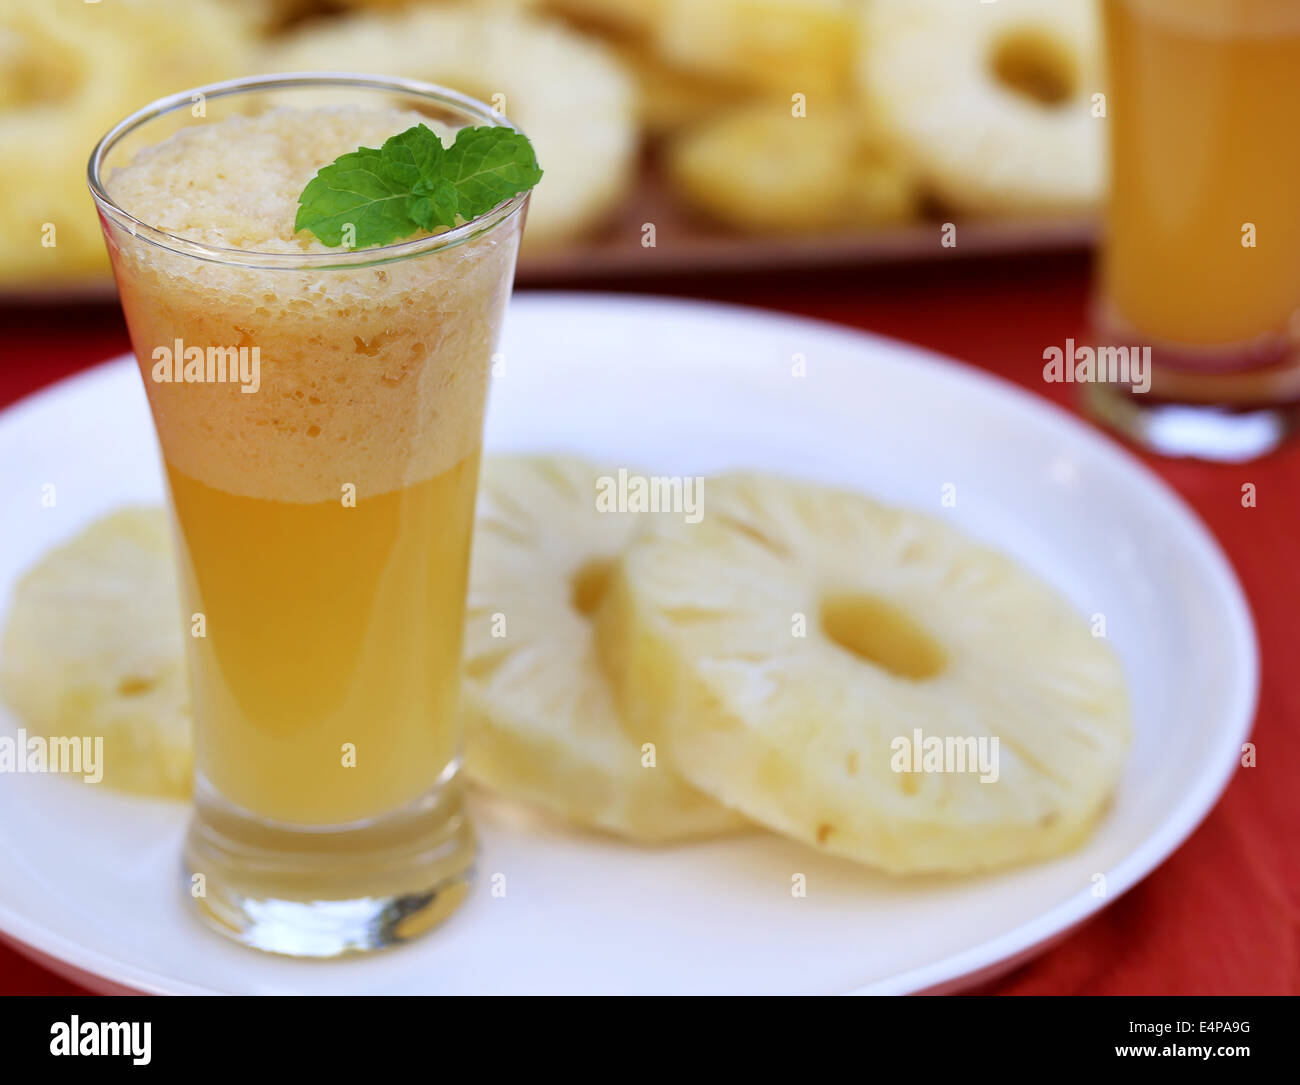 Sliced pineapple with juice in glass Stock Photo